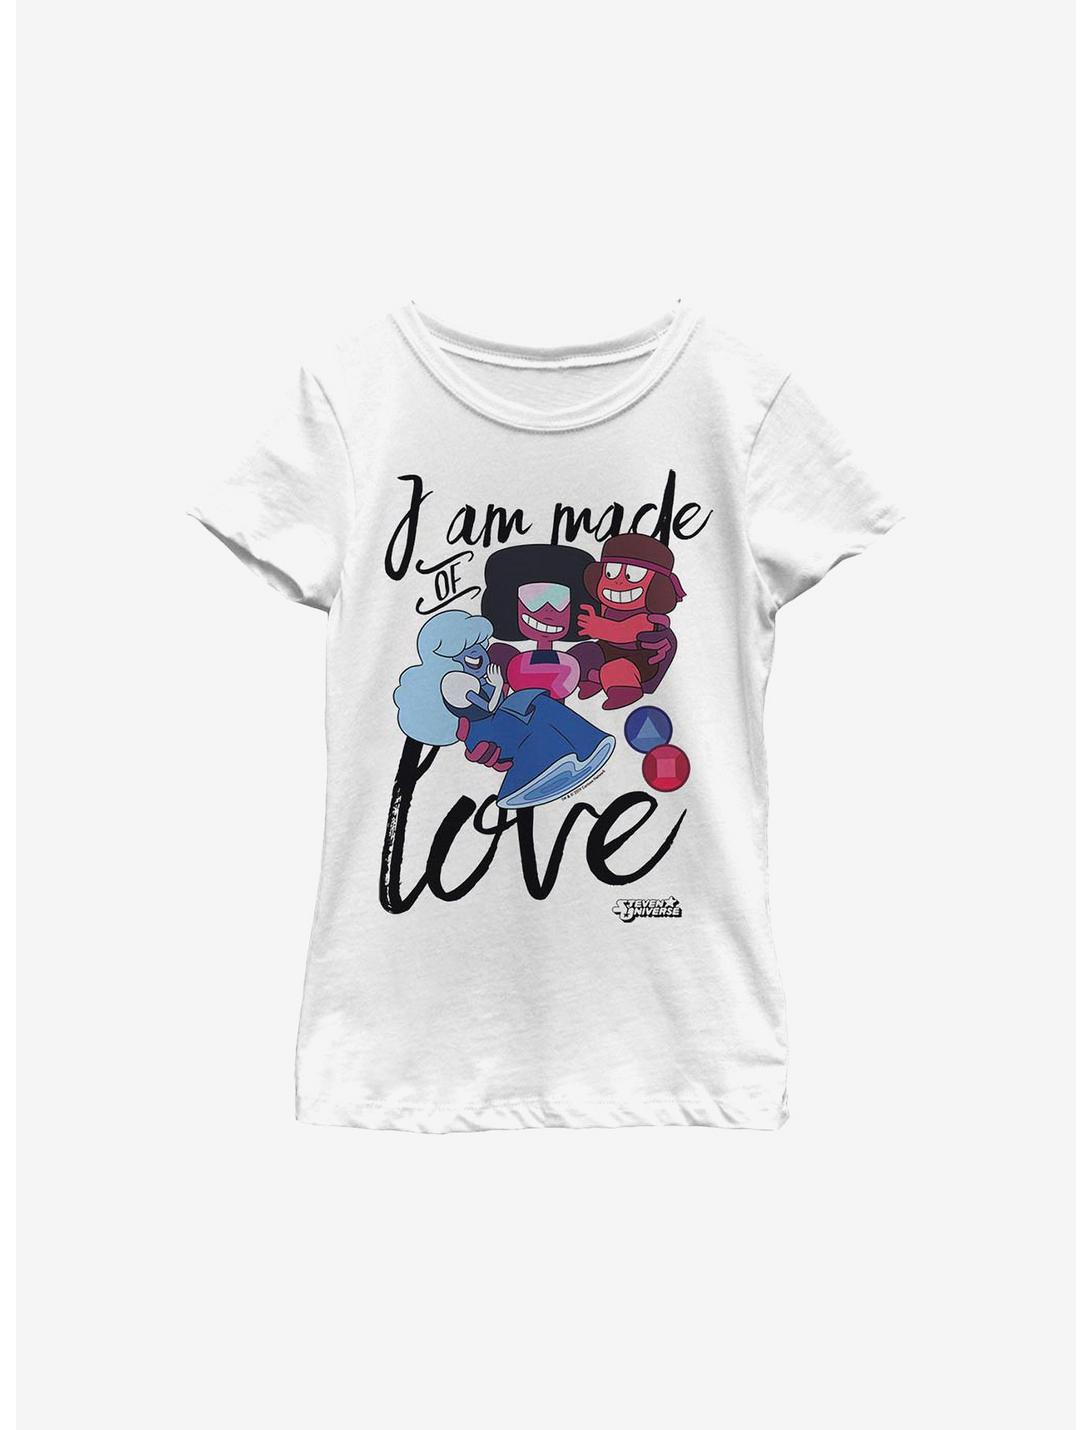 Steven Universe I Am Made Of Love Youth Girls T-Shirt, WHITE, hi-res